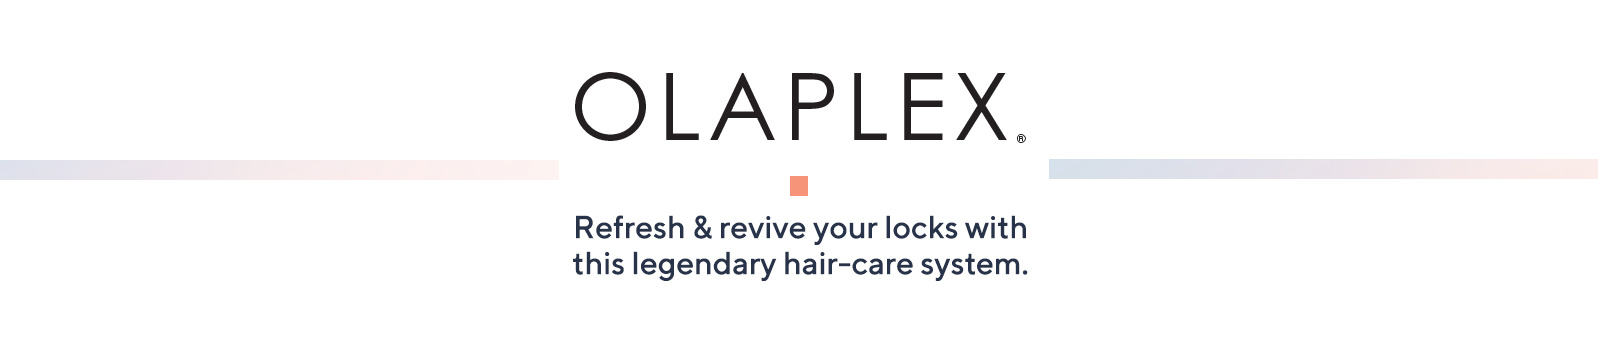 OLAPLEX -  Refresh & revive your locks with this legendary hair-care system.